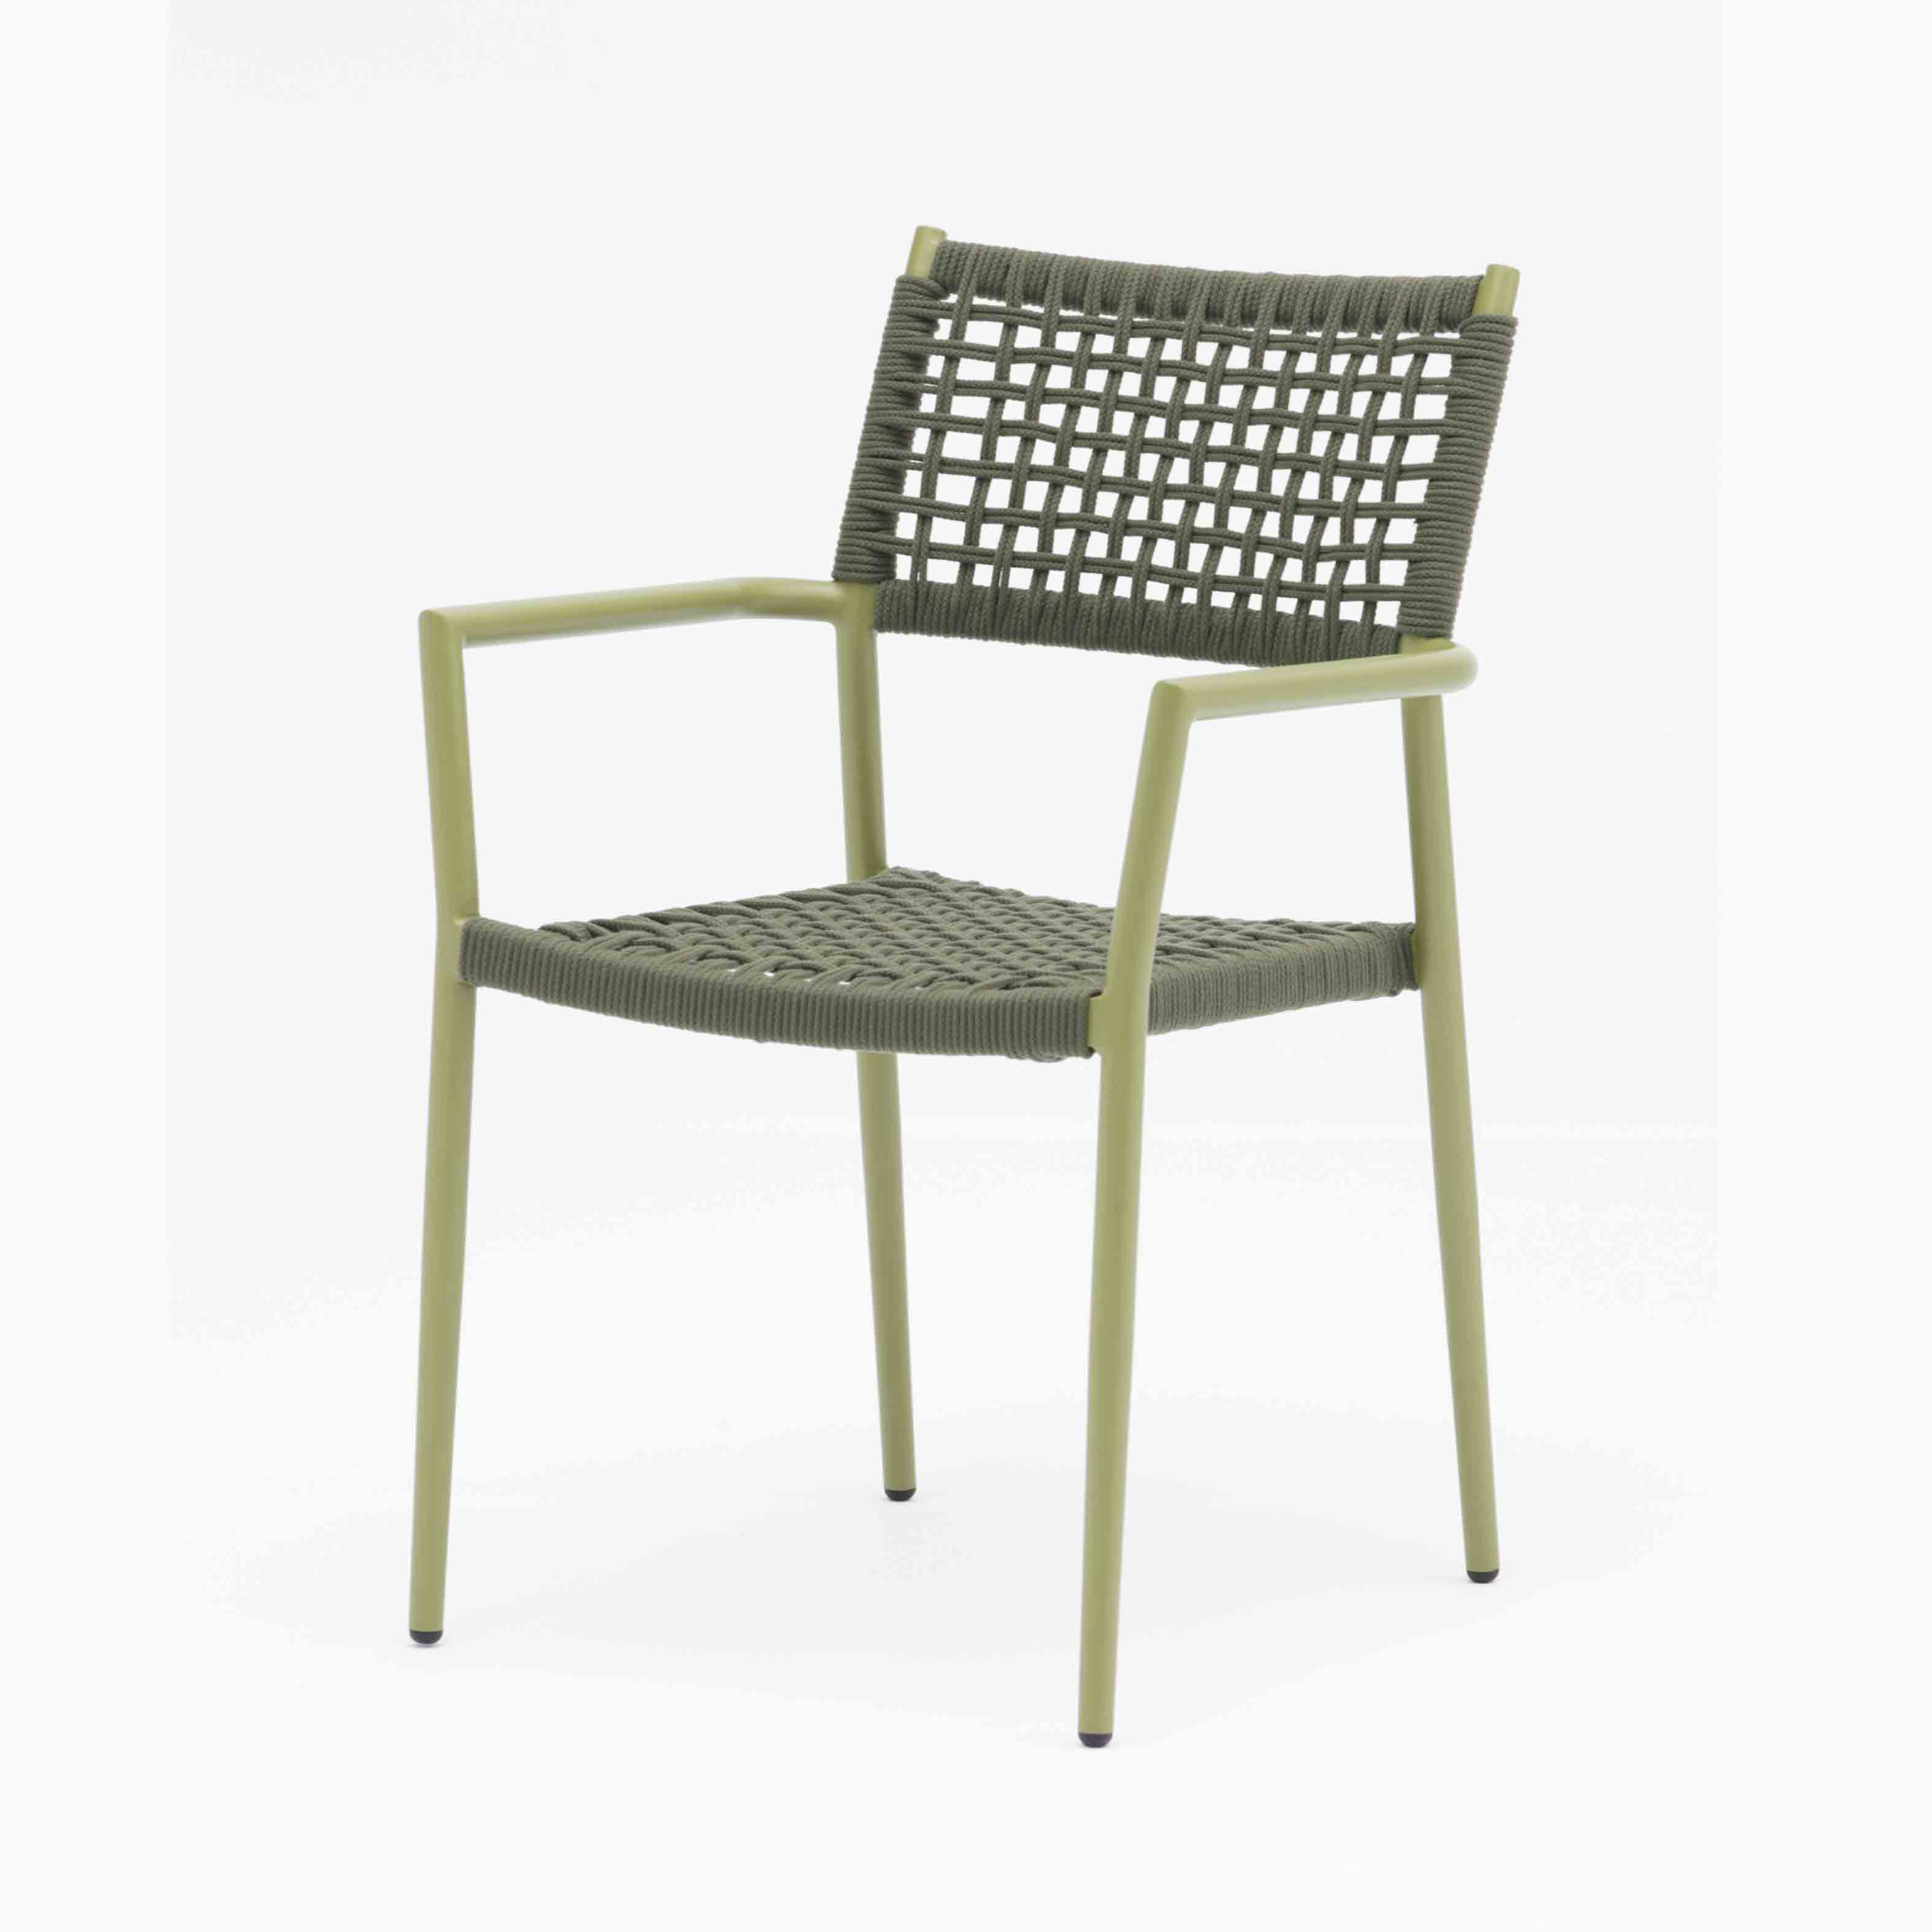 Mocha rope dining chair S7